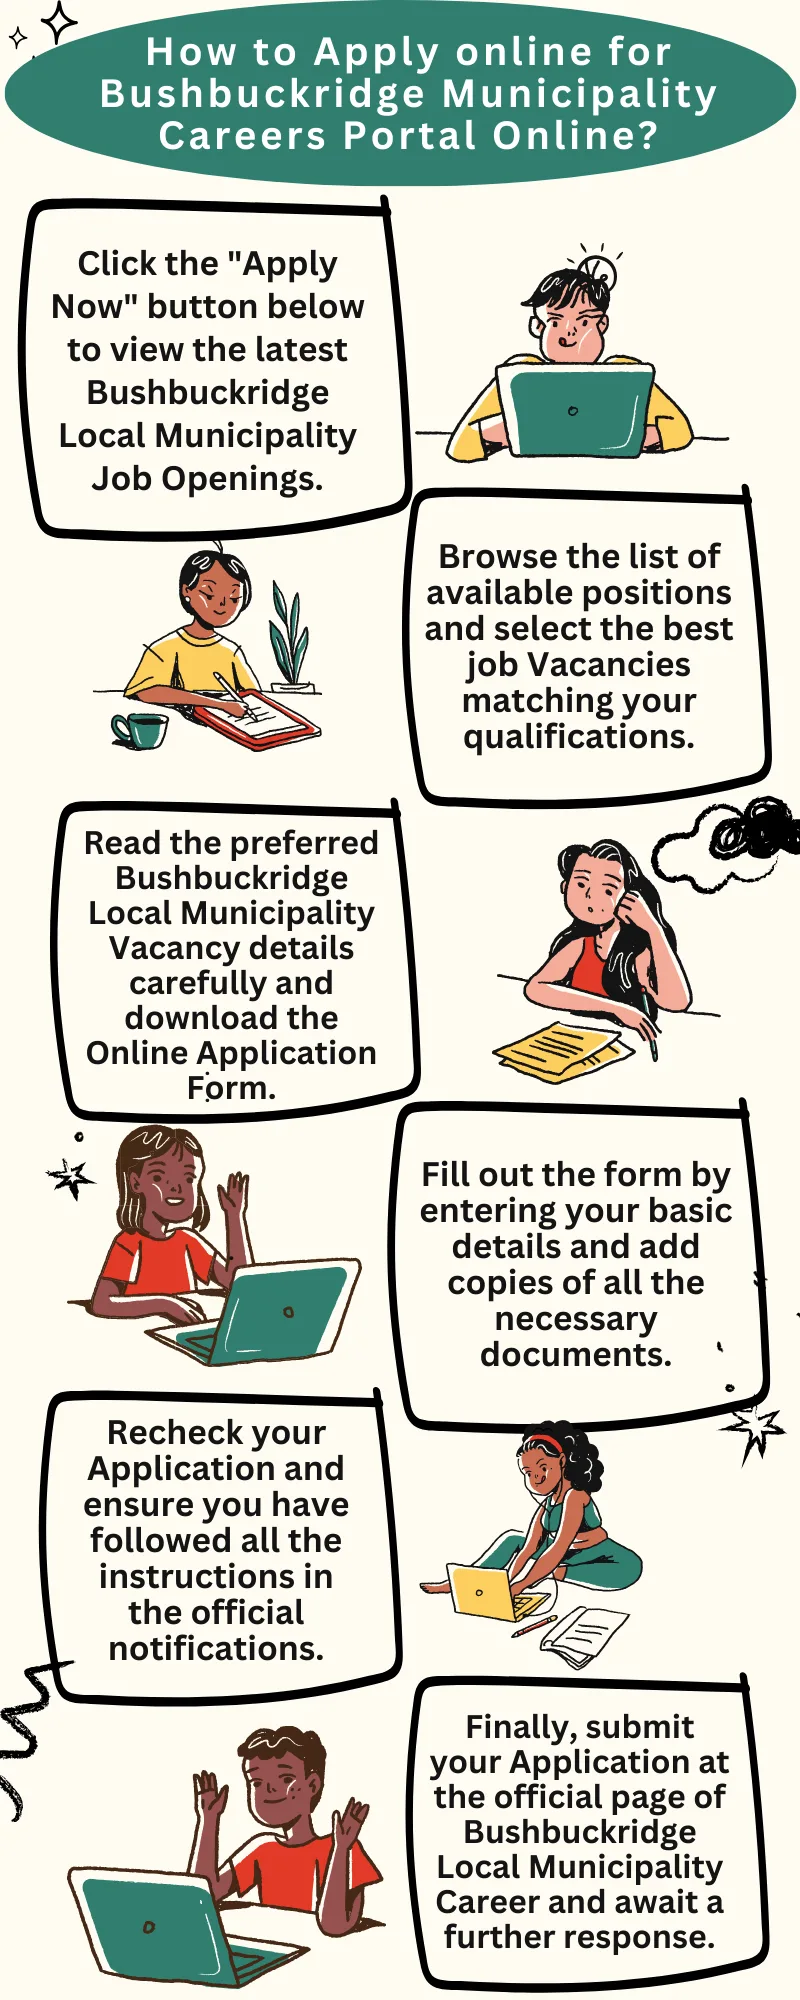 How to Apply online for Bushbuckridge Municipality Careers Portal Online?